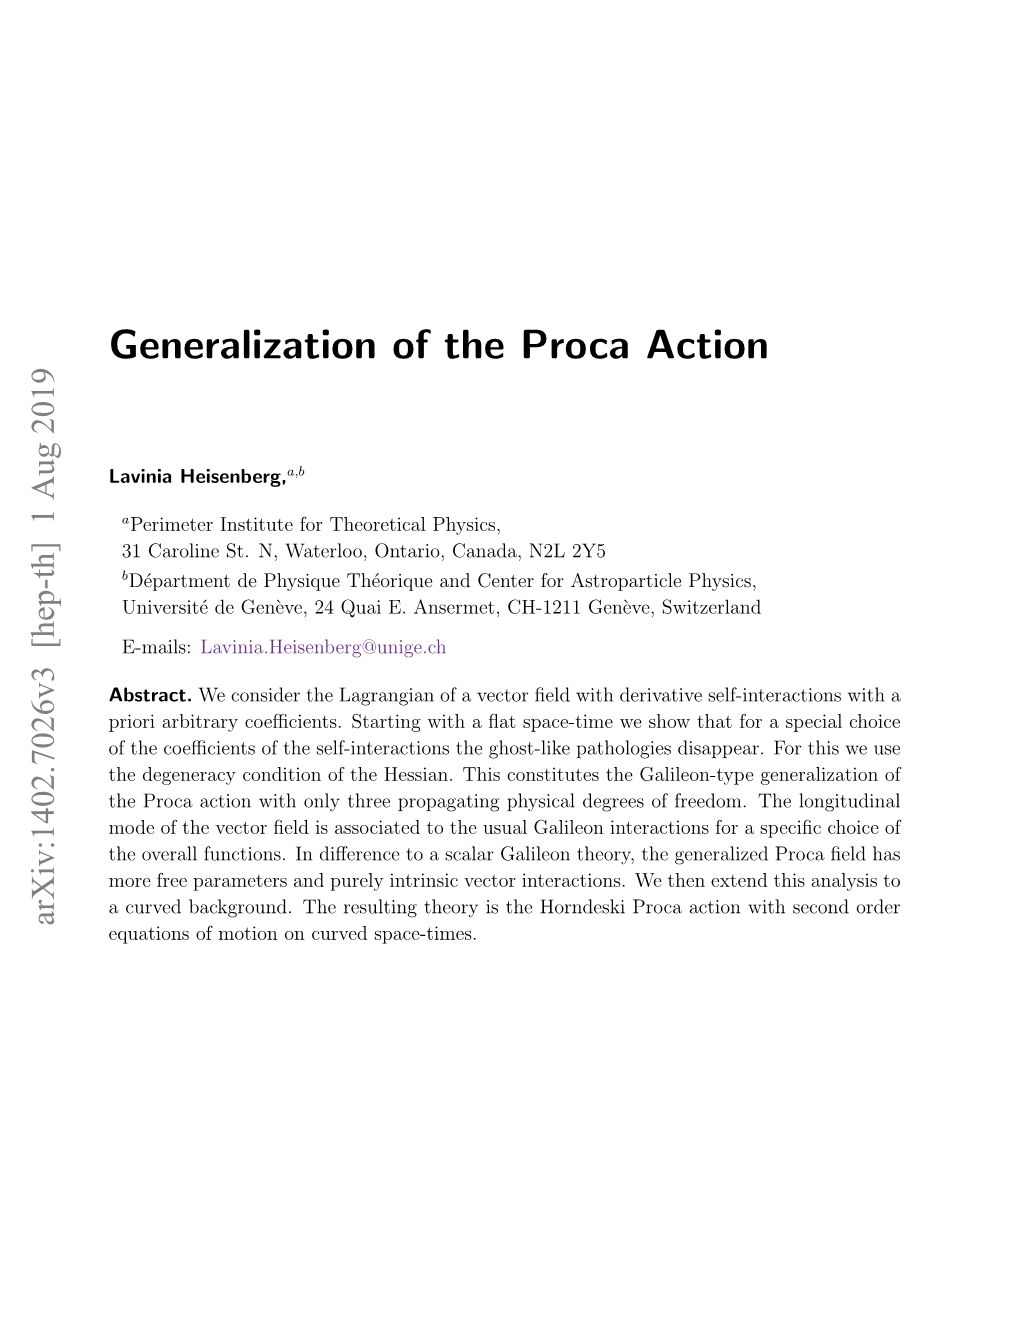 Generalization of the Proca Action